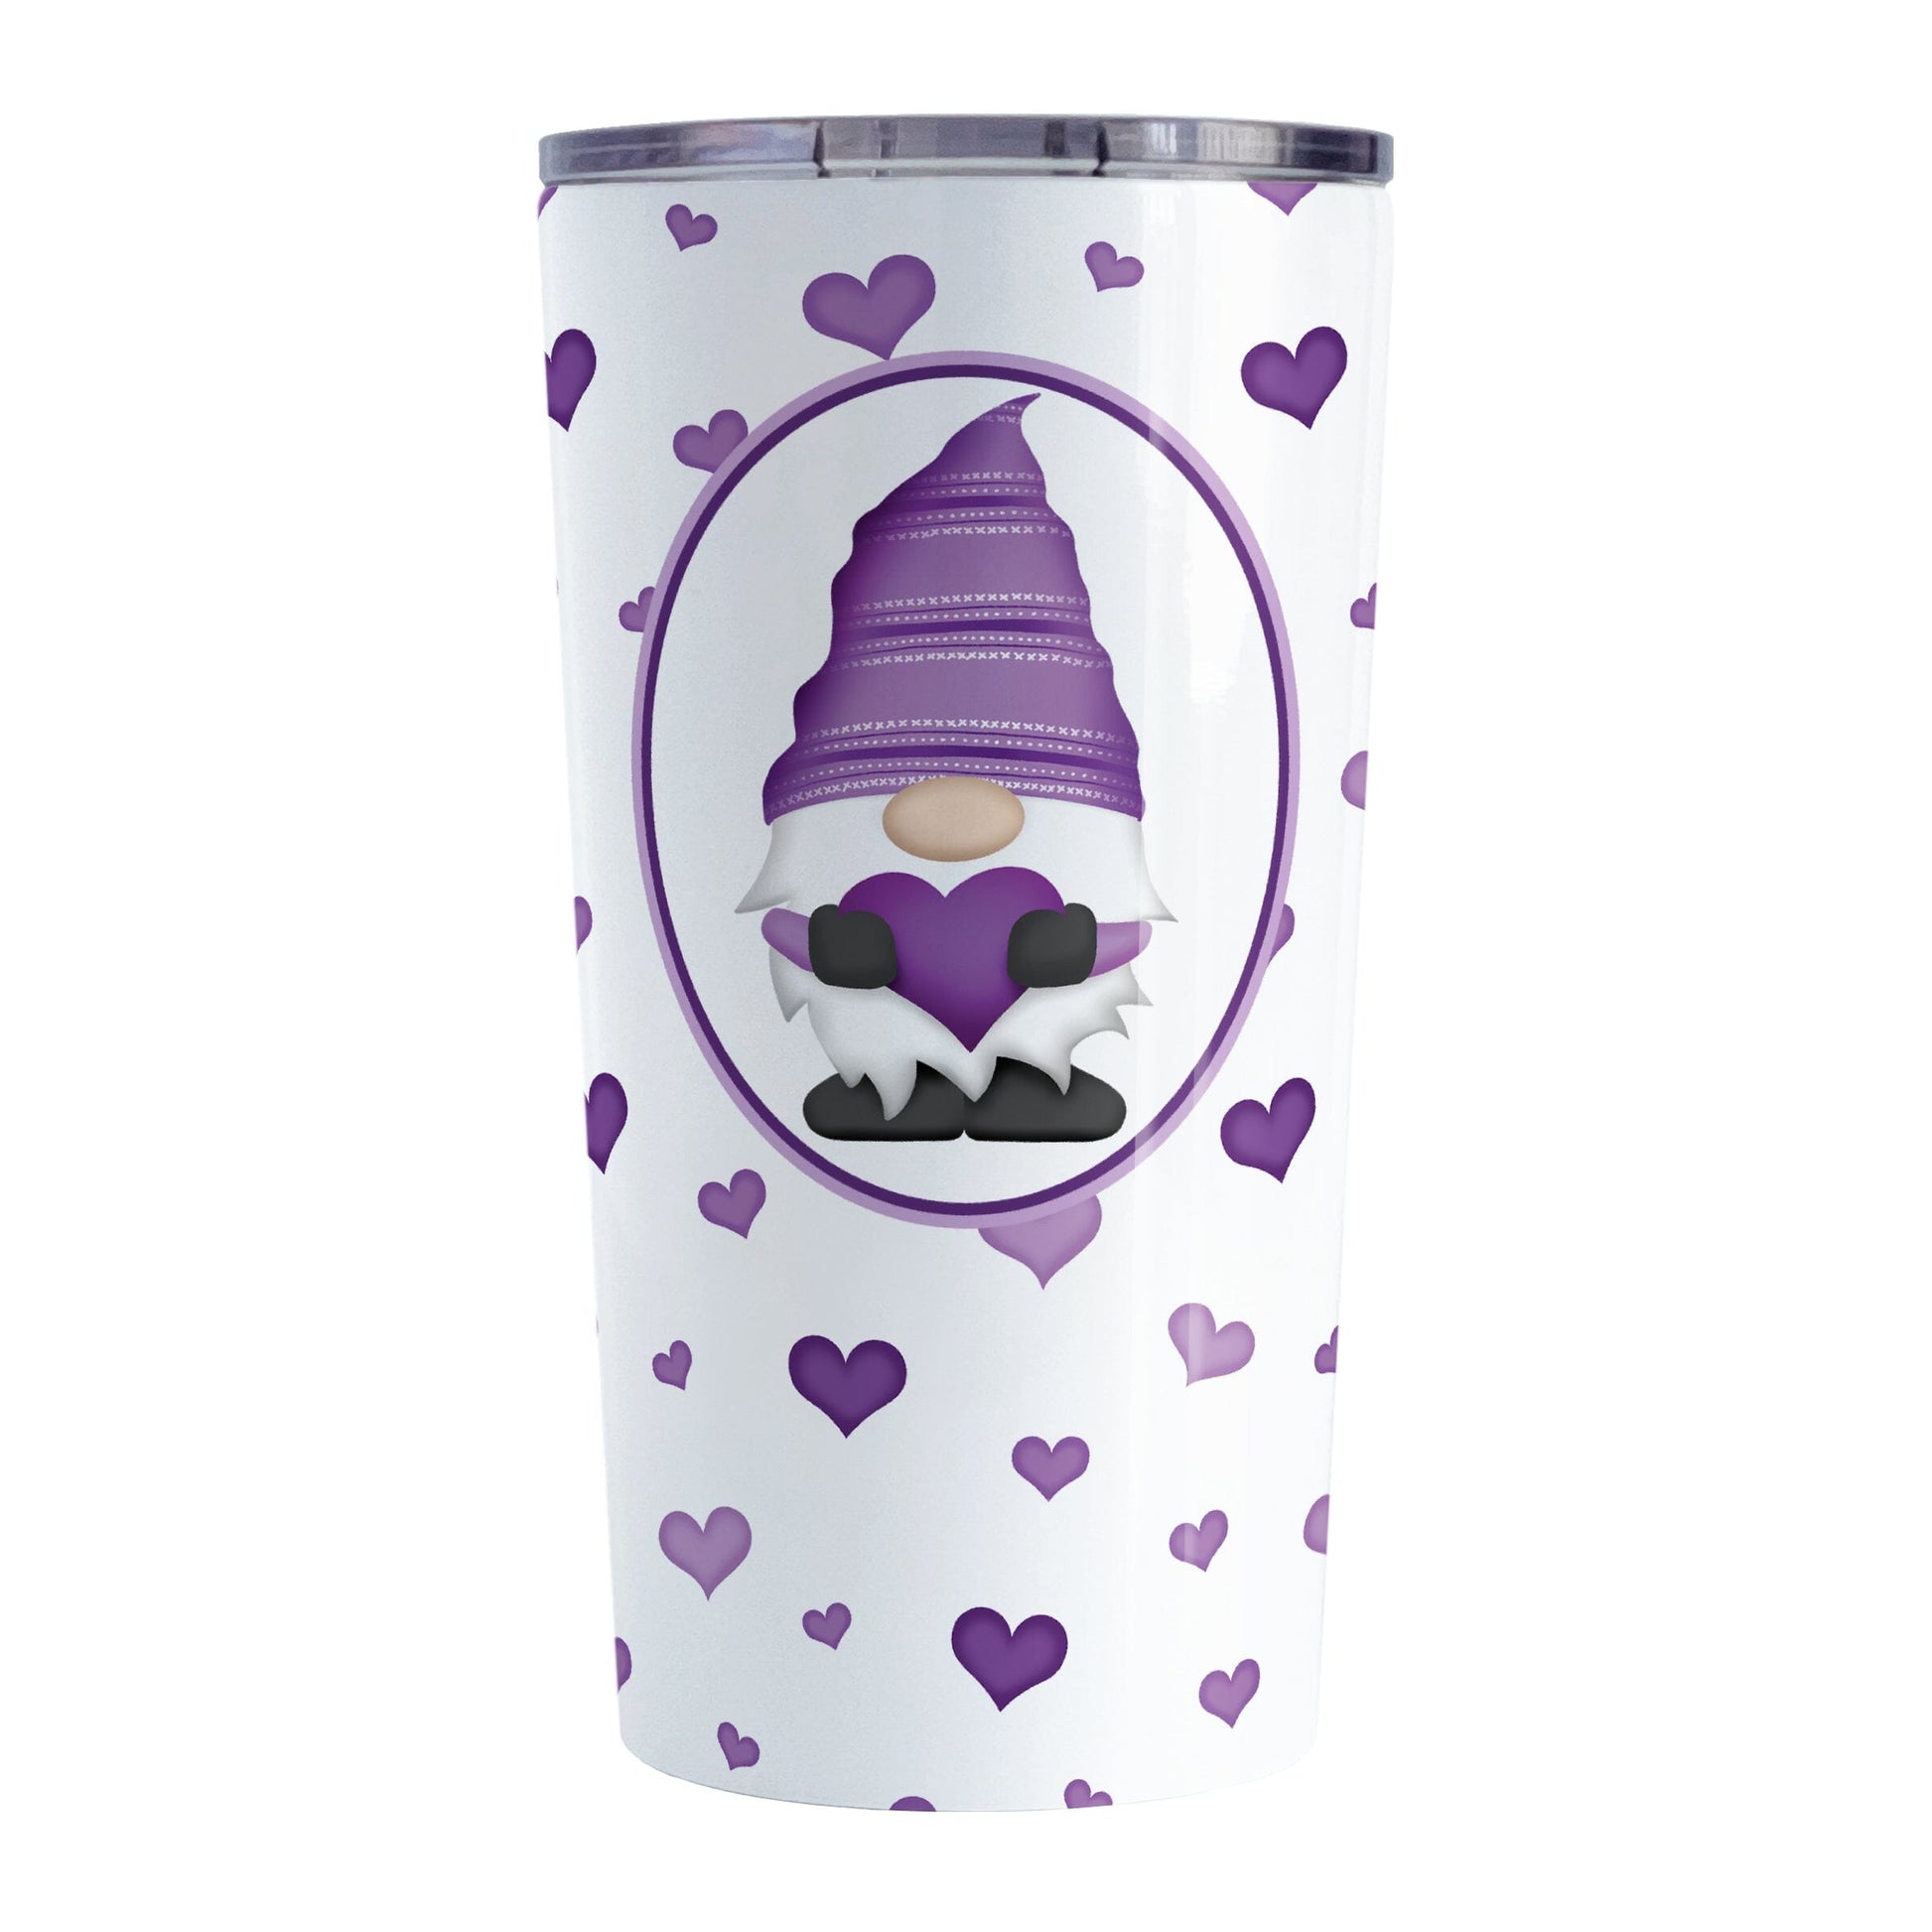 Purple Gnome Dainty Hearts Tumbler Cup (20oz) at Amy's Coffee Mugs. A stainless steel tumbler cup designed with an adorable purple gnome holding a heart in a white oval over a pattern of cute and dainty hearts in different shades of purple that wrap around the cup.